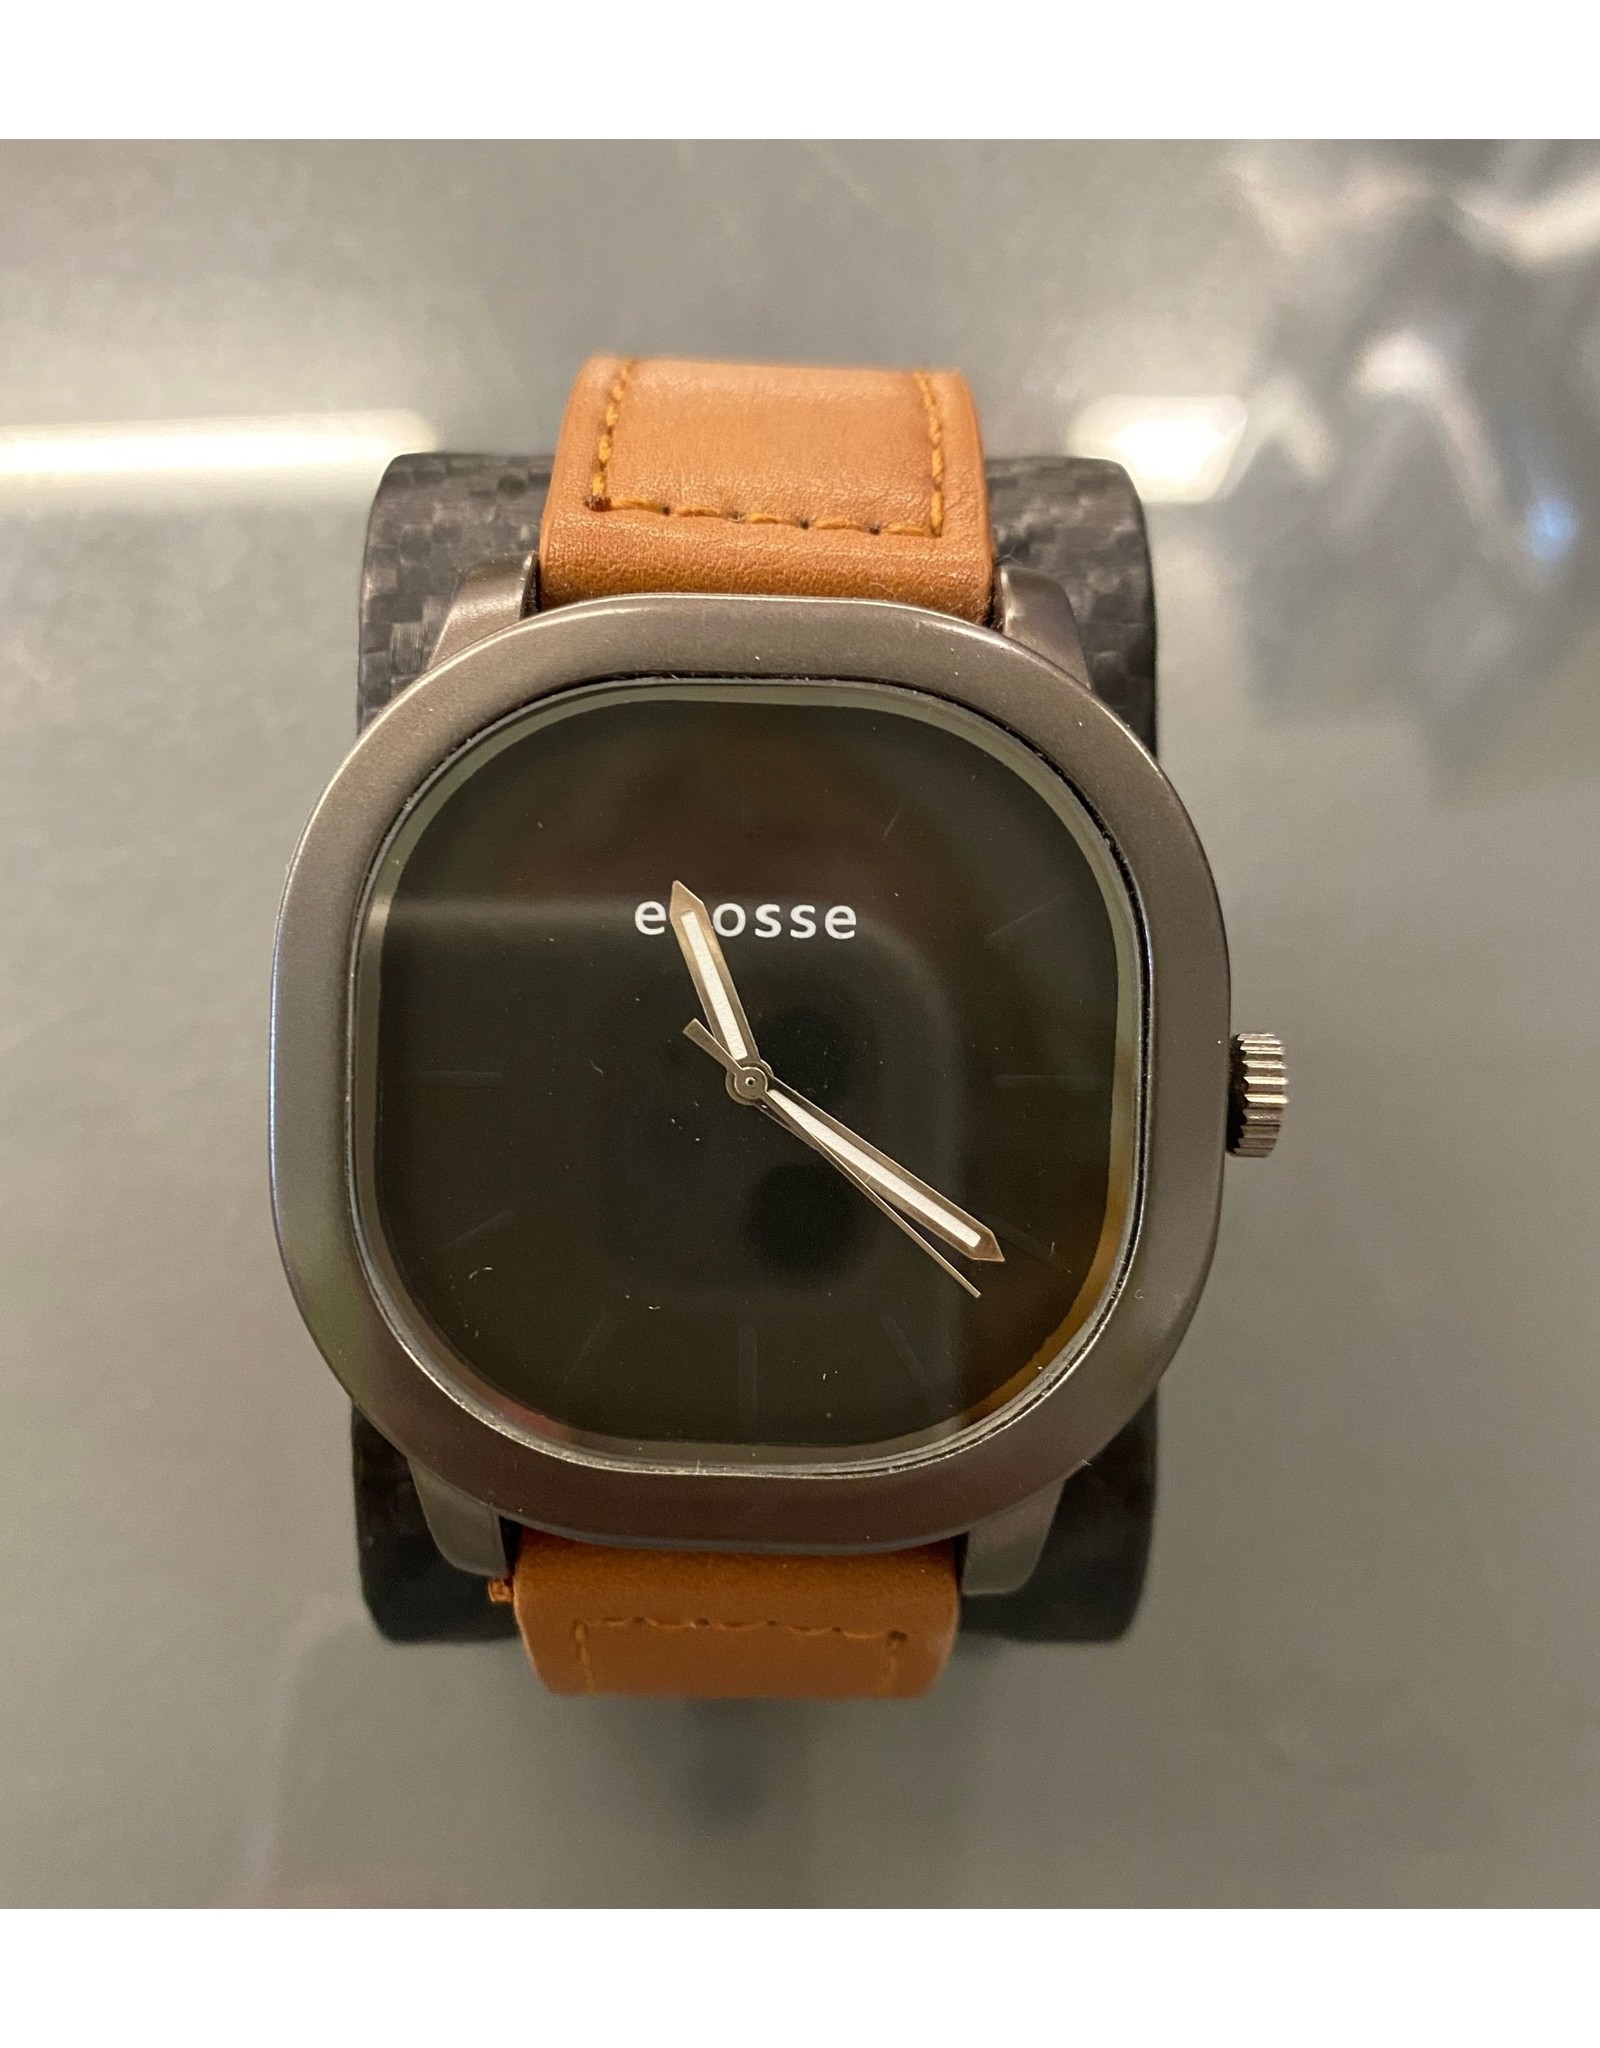 Mens Watch Rounded Square Face with Brown Strap